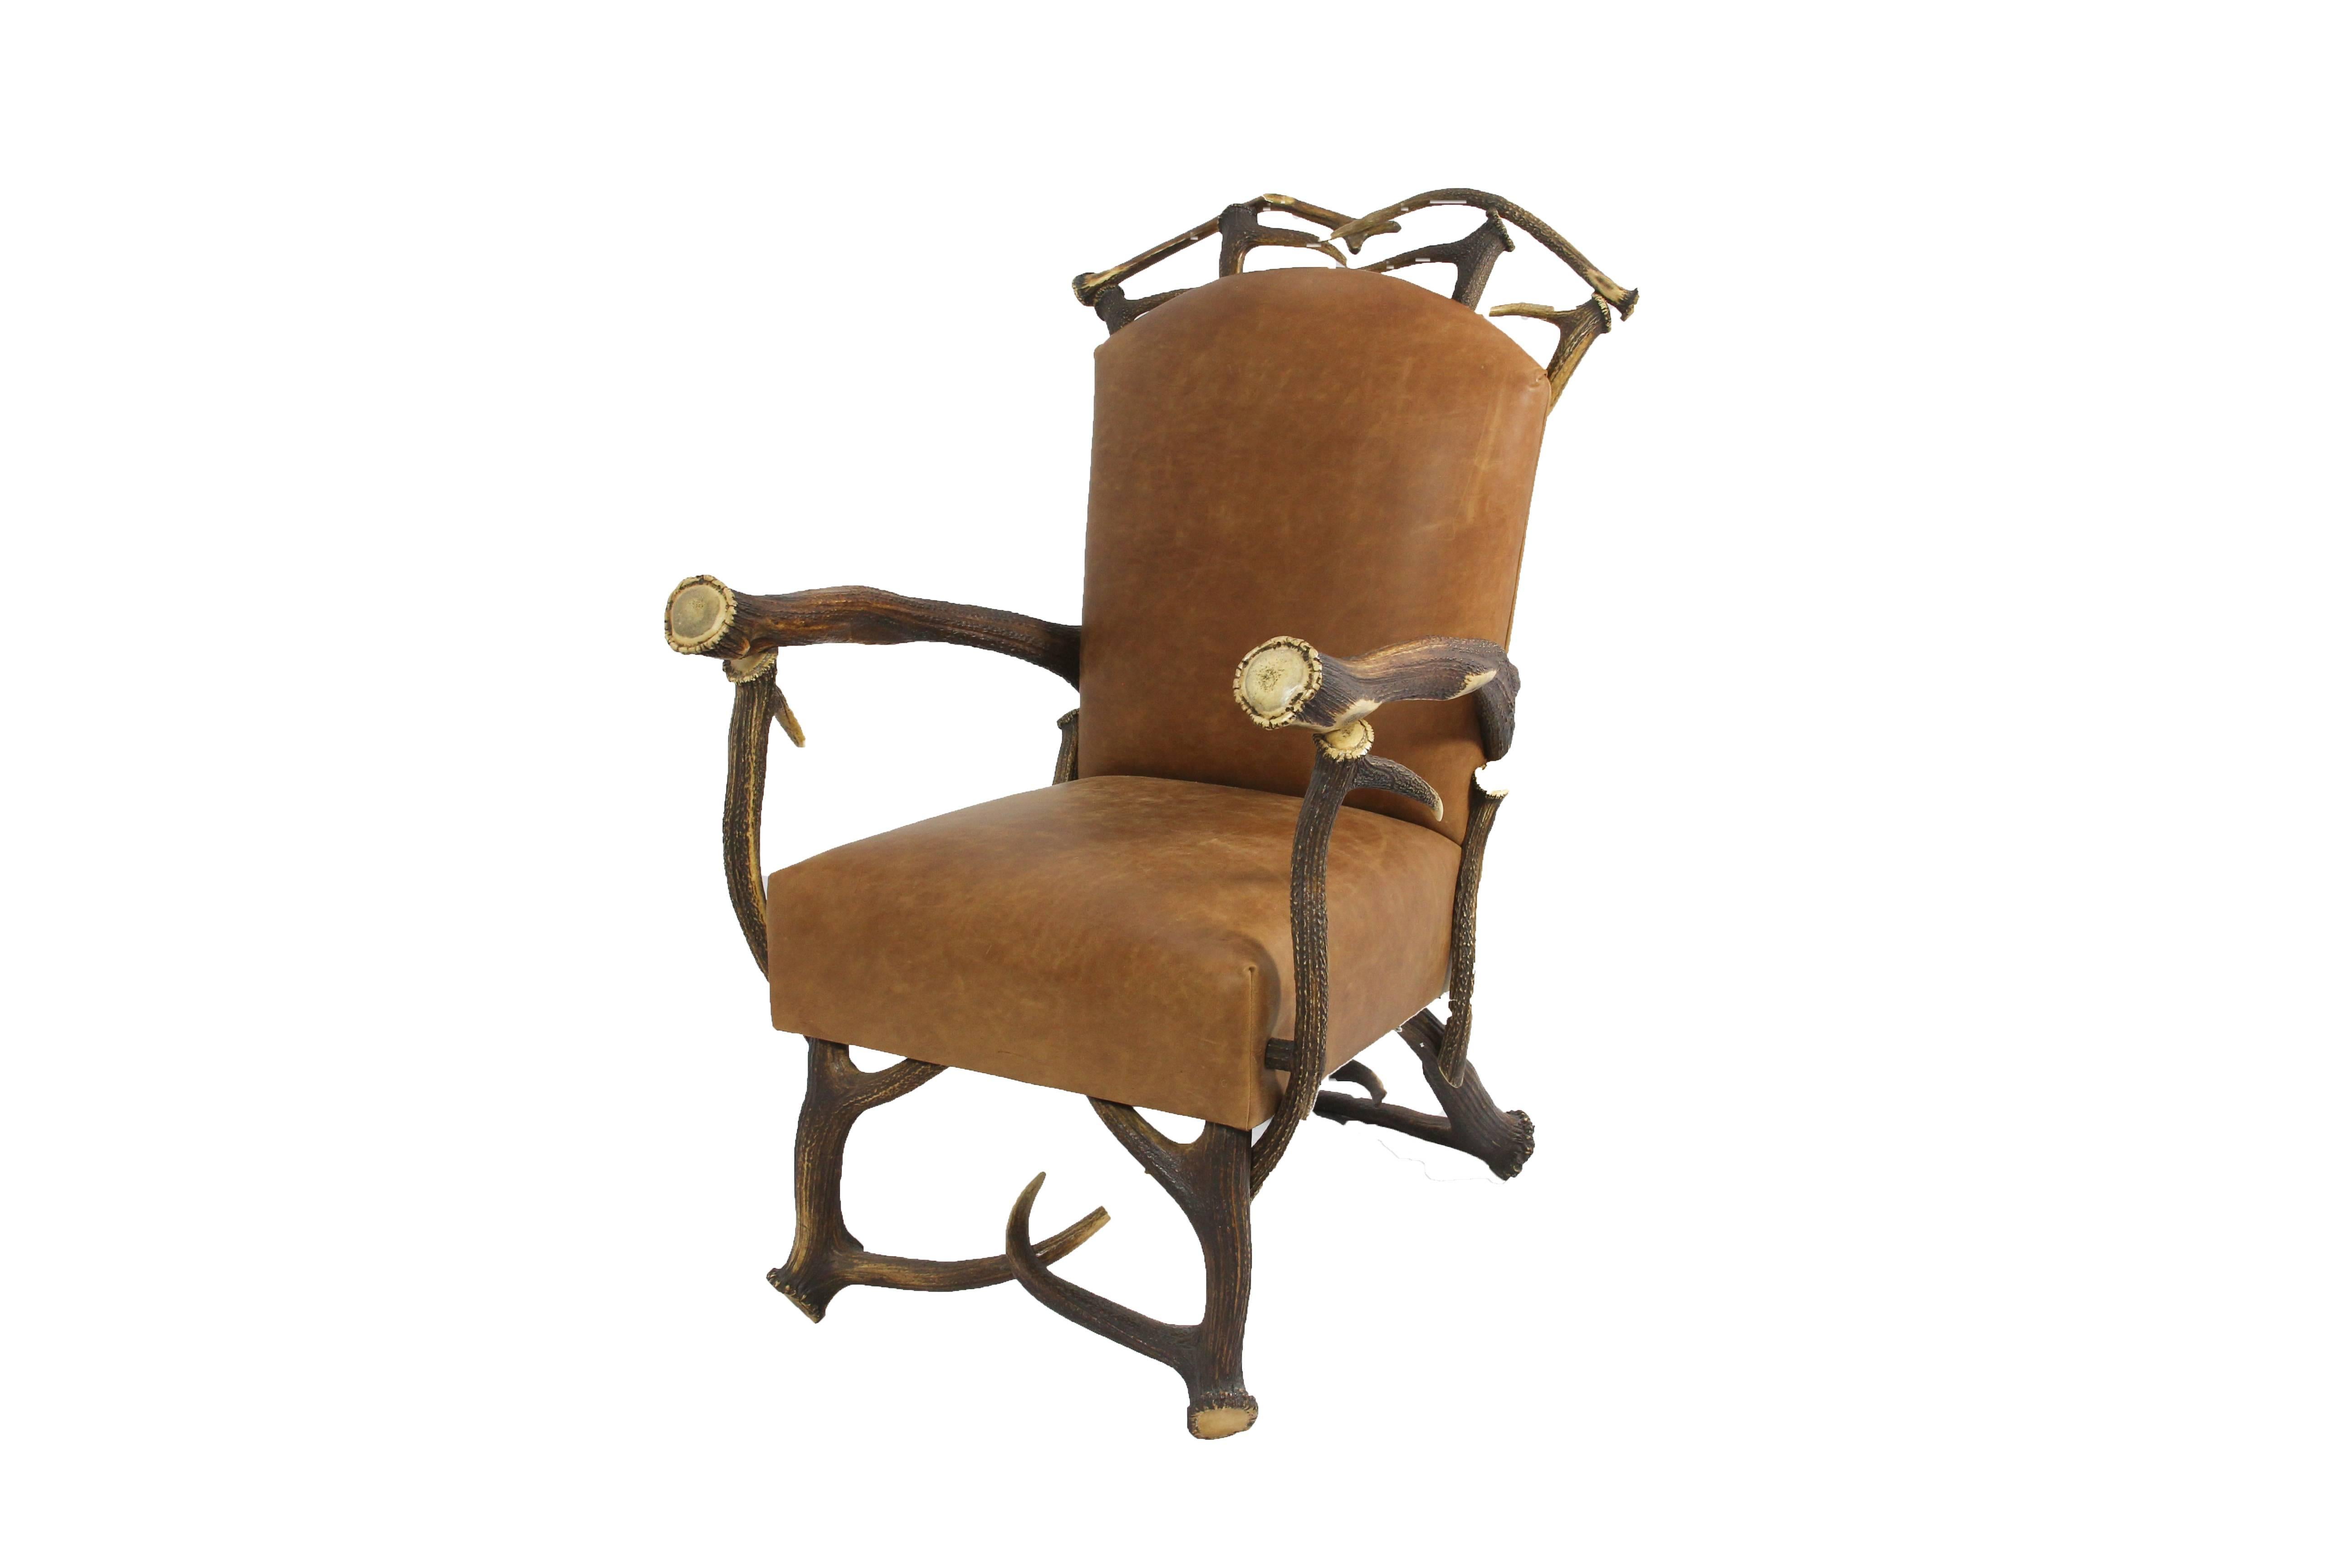 American Brown Leather and Red Stag Antler Chair with Matching Ottoman